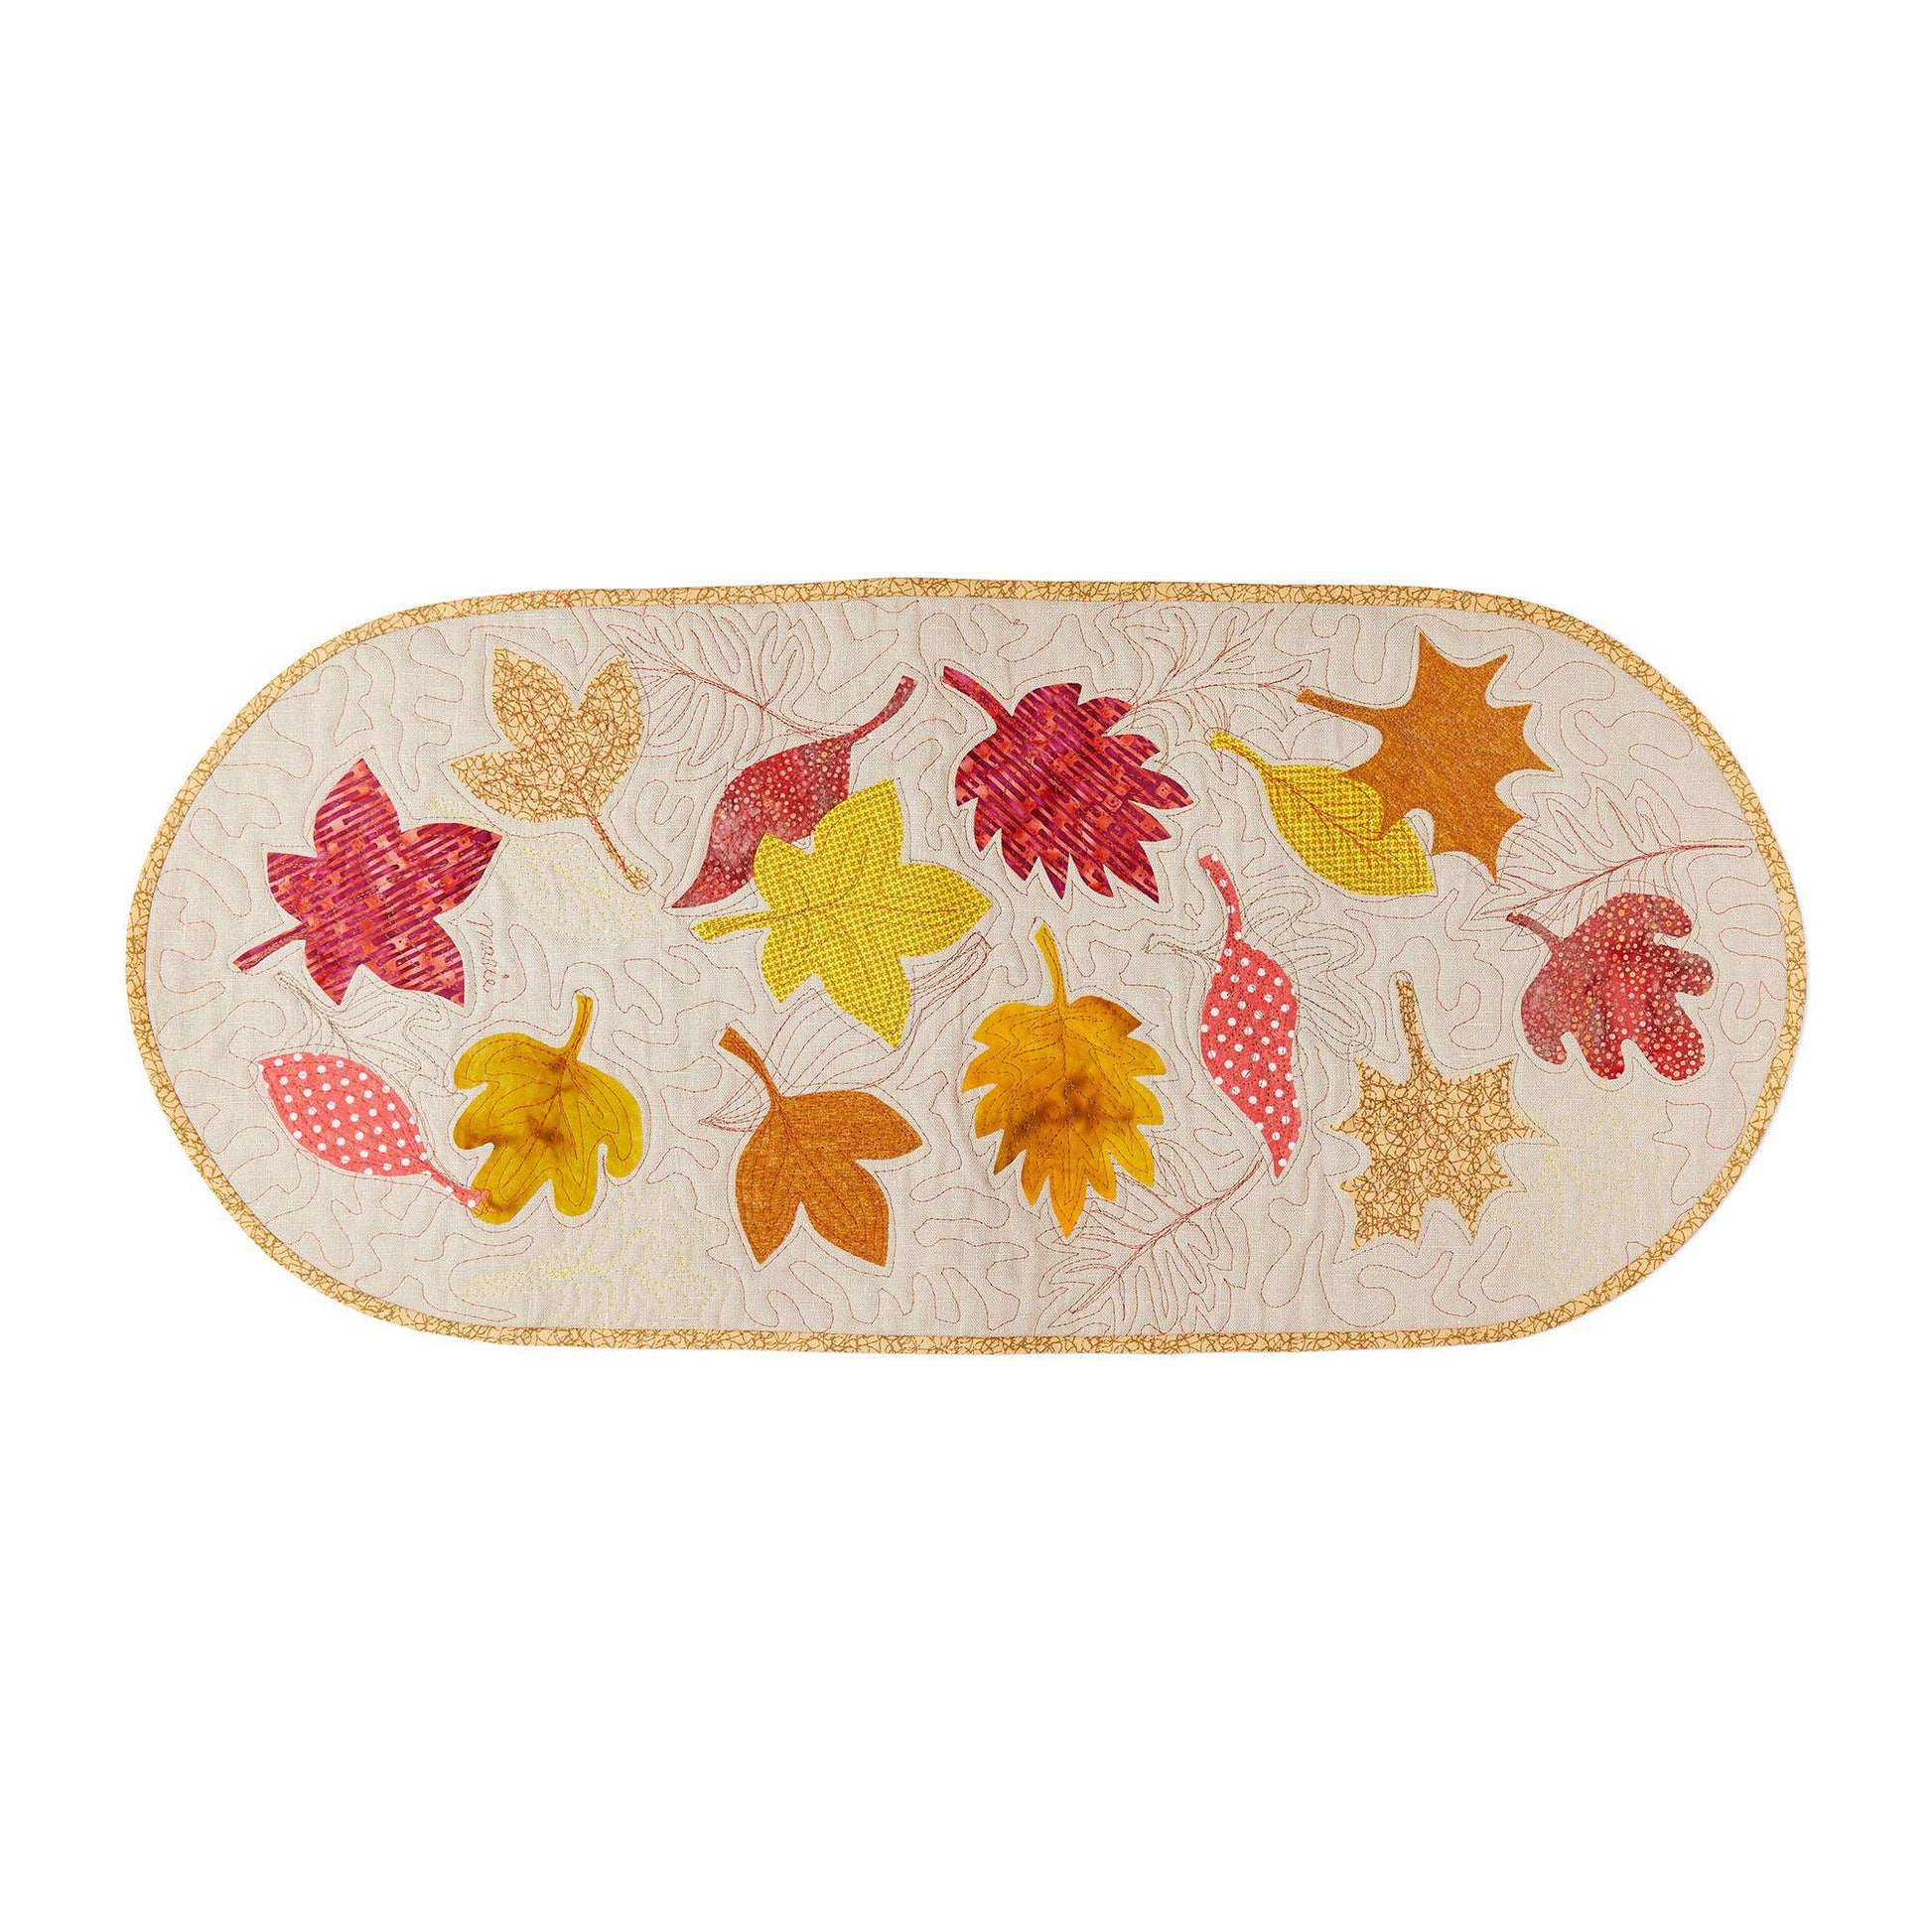 Free Coats & Clark Sewing Autumn Leaf Table Runner Pattern